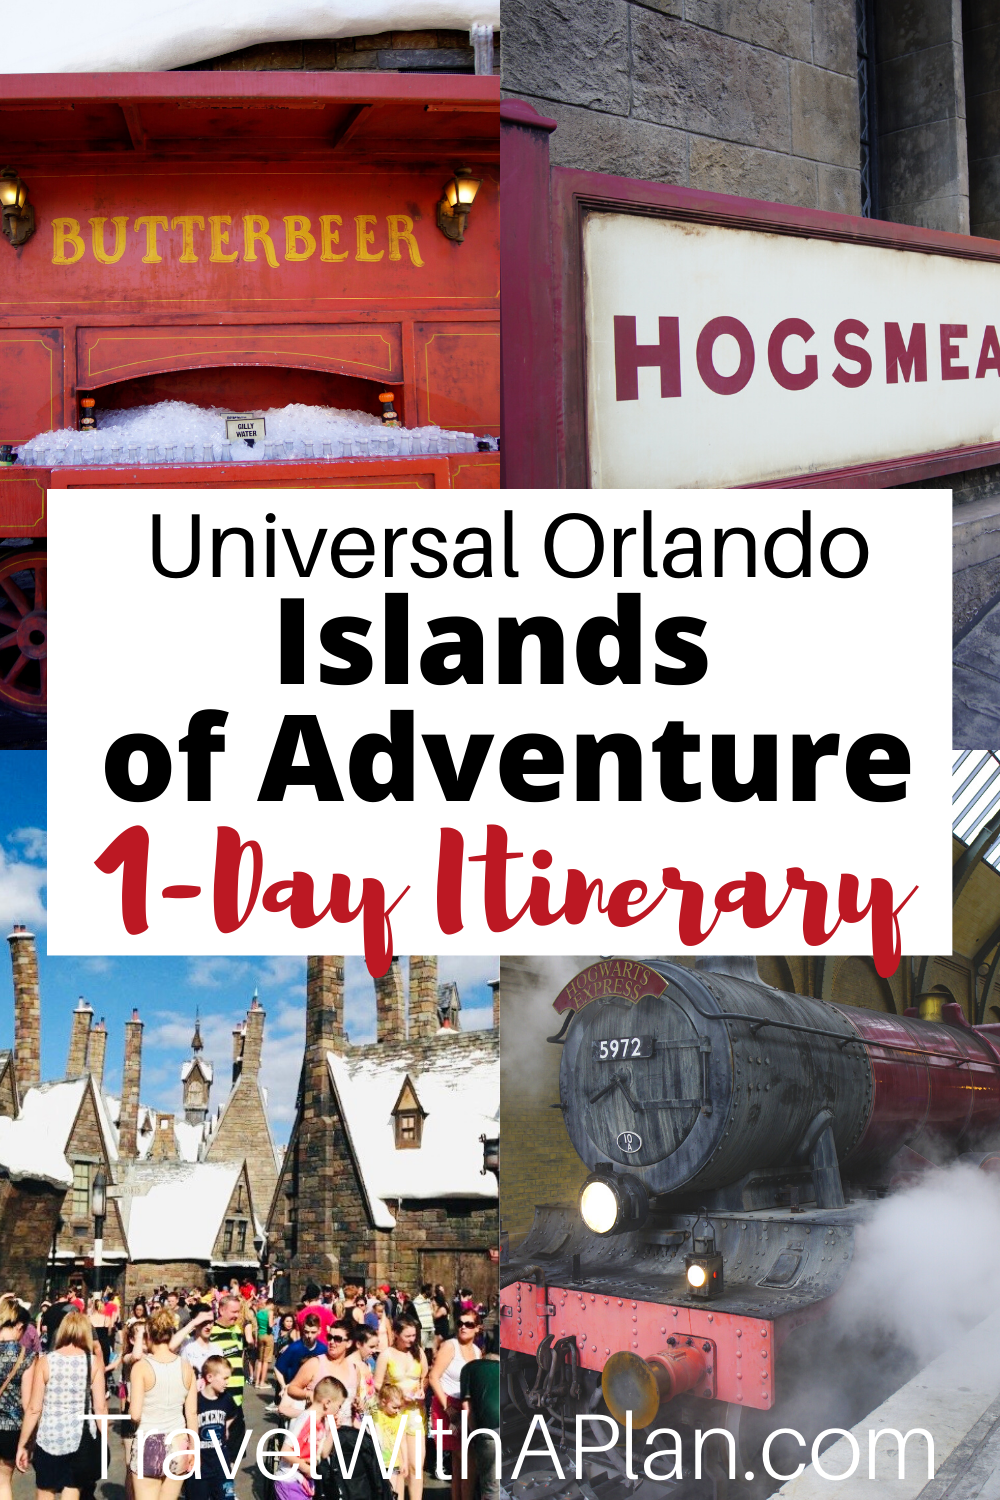 Universal's Islands of Adventure has been rated the #1 theme park in the world for good reason!  Read here for a complete Islands of Adventure touring plan to experience the best rides at Islands of Adventure and a perfect day in the park!  #islandsofadventureorlando #islandsofadventureorlandotips #islandsofadventureitinerary #islandsofadventureorlandoitinerary #universalislandsofadventuretips #tipsforislandsofadventure #universalstudiosislandsofadventuretips